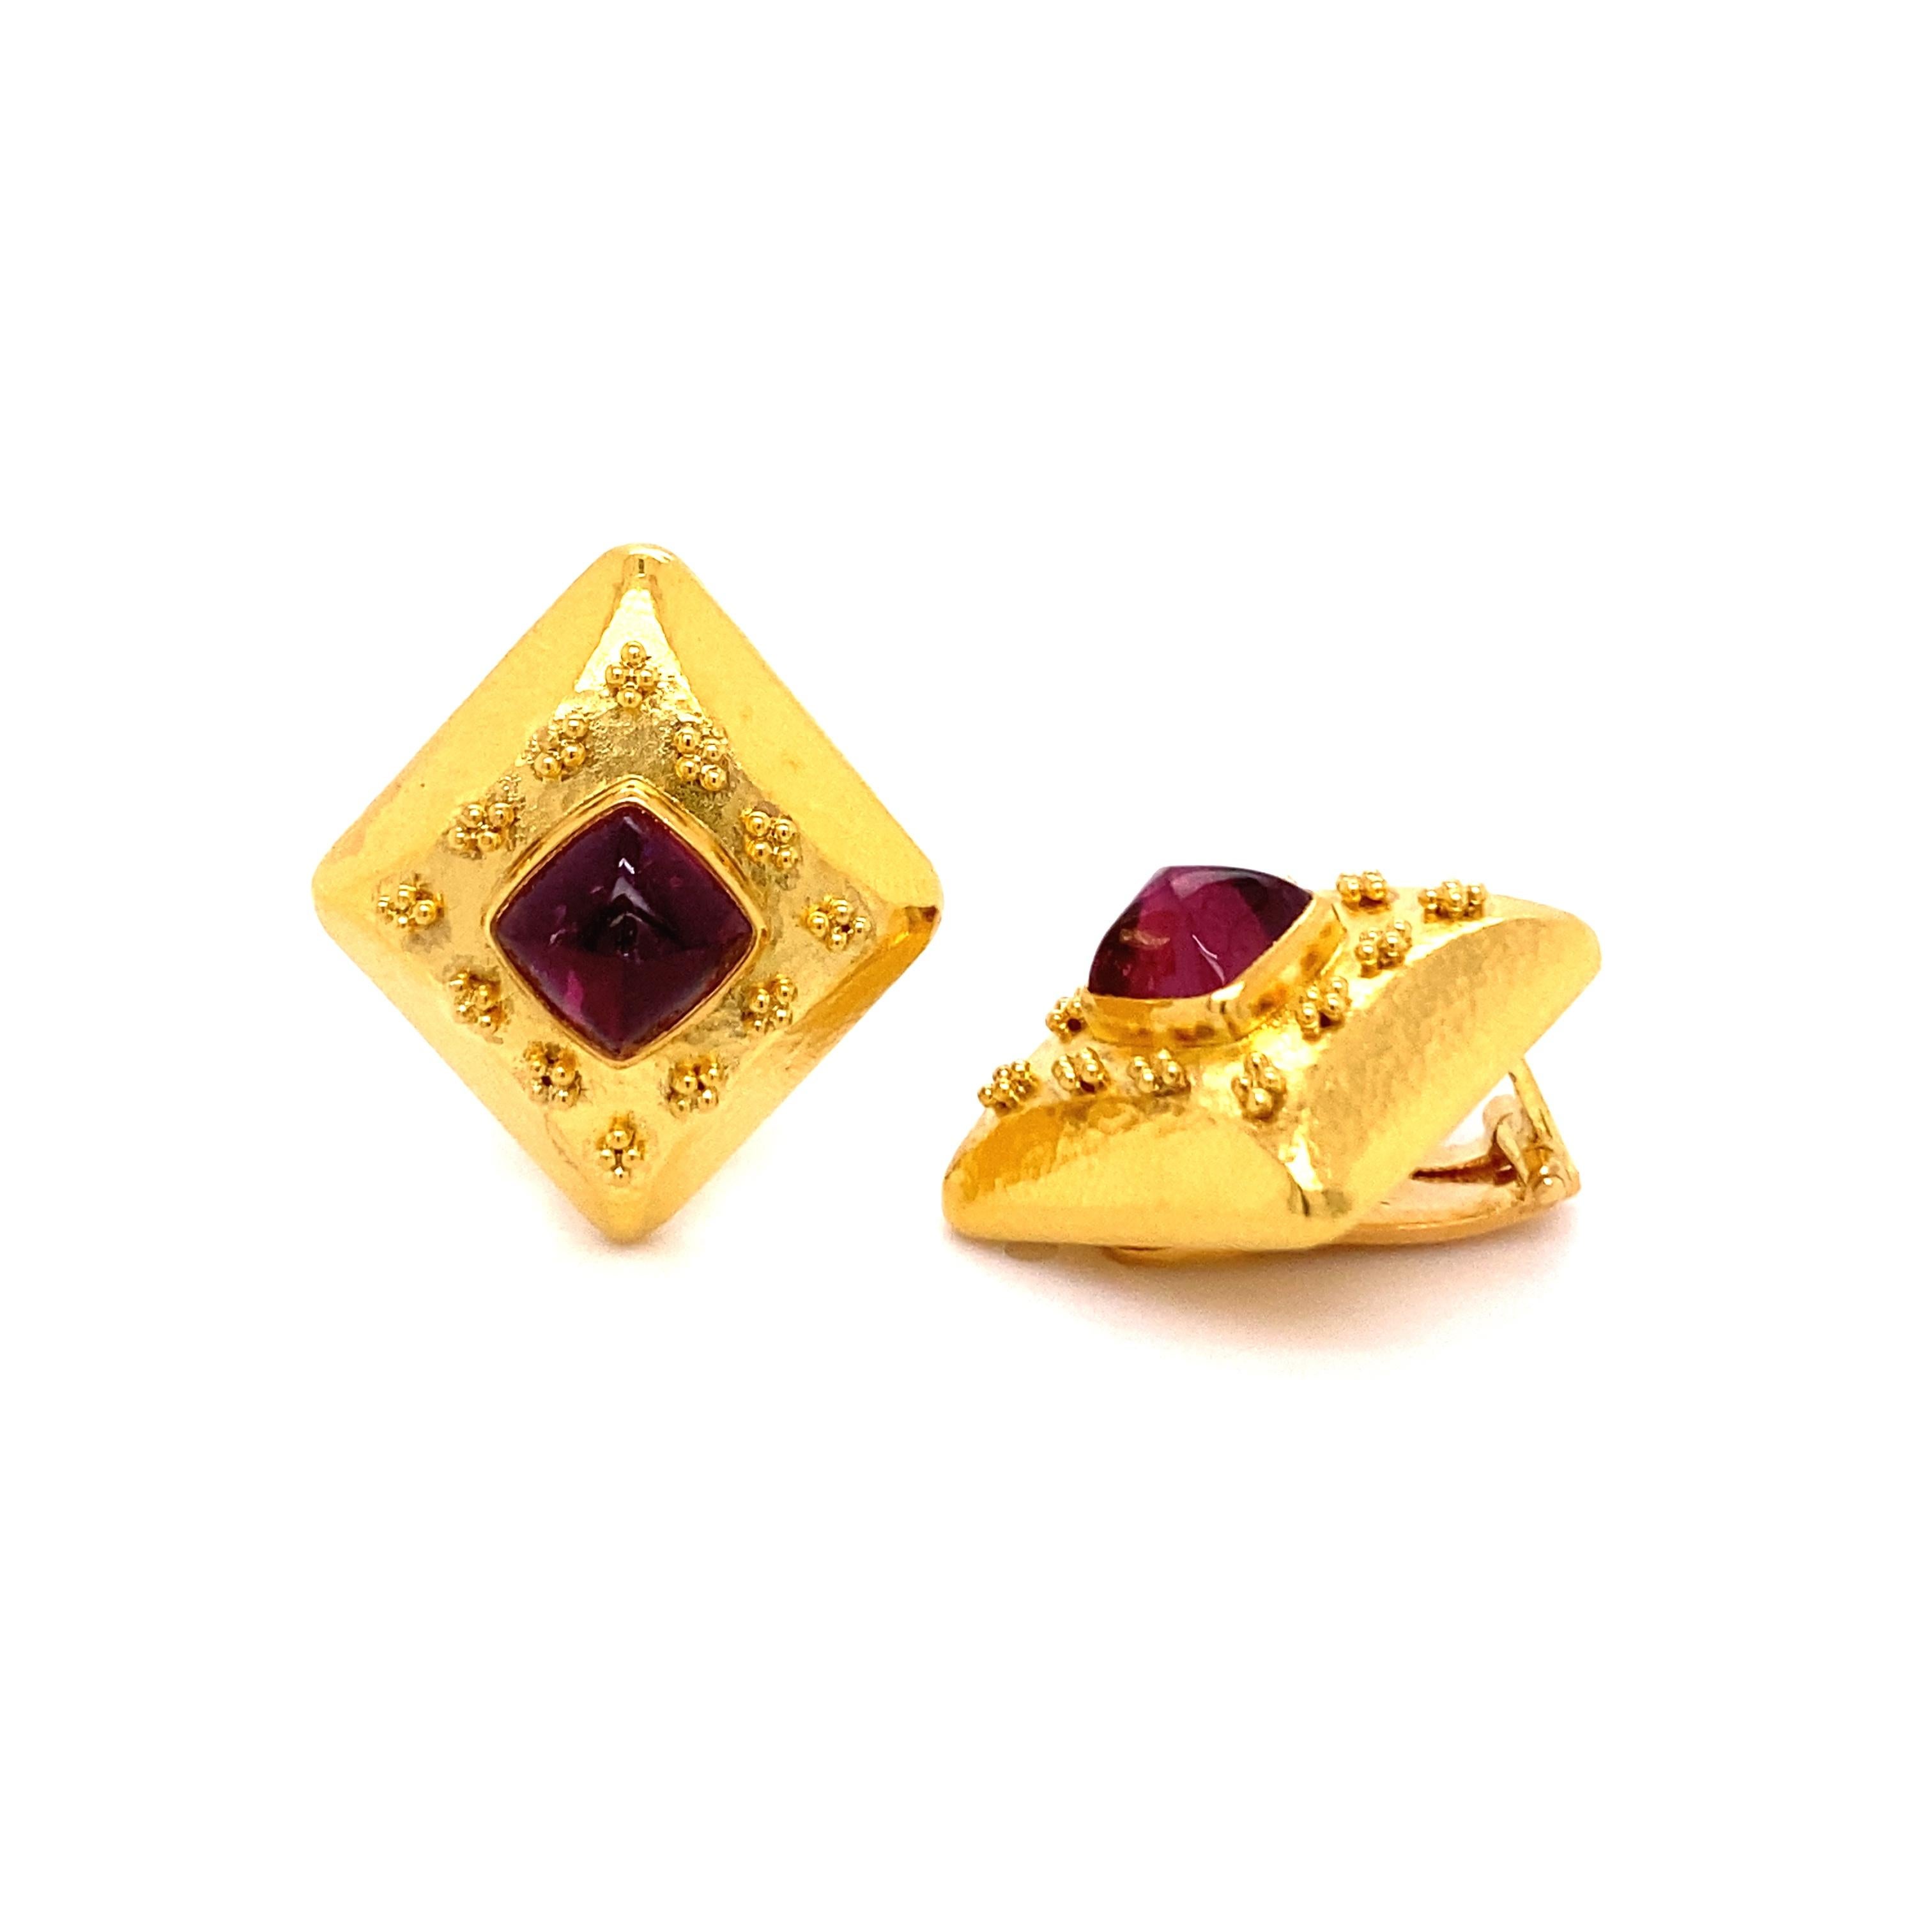 Sugarloaf Cabochon Pink Tourmaline Sugarloaf Earclips with Granulation in 18 Karat Yellow Gold For Sale